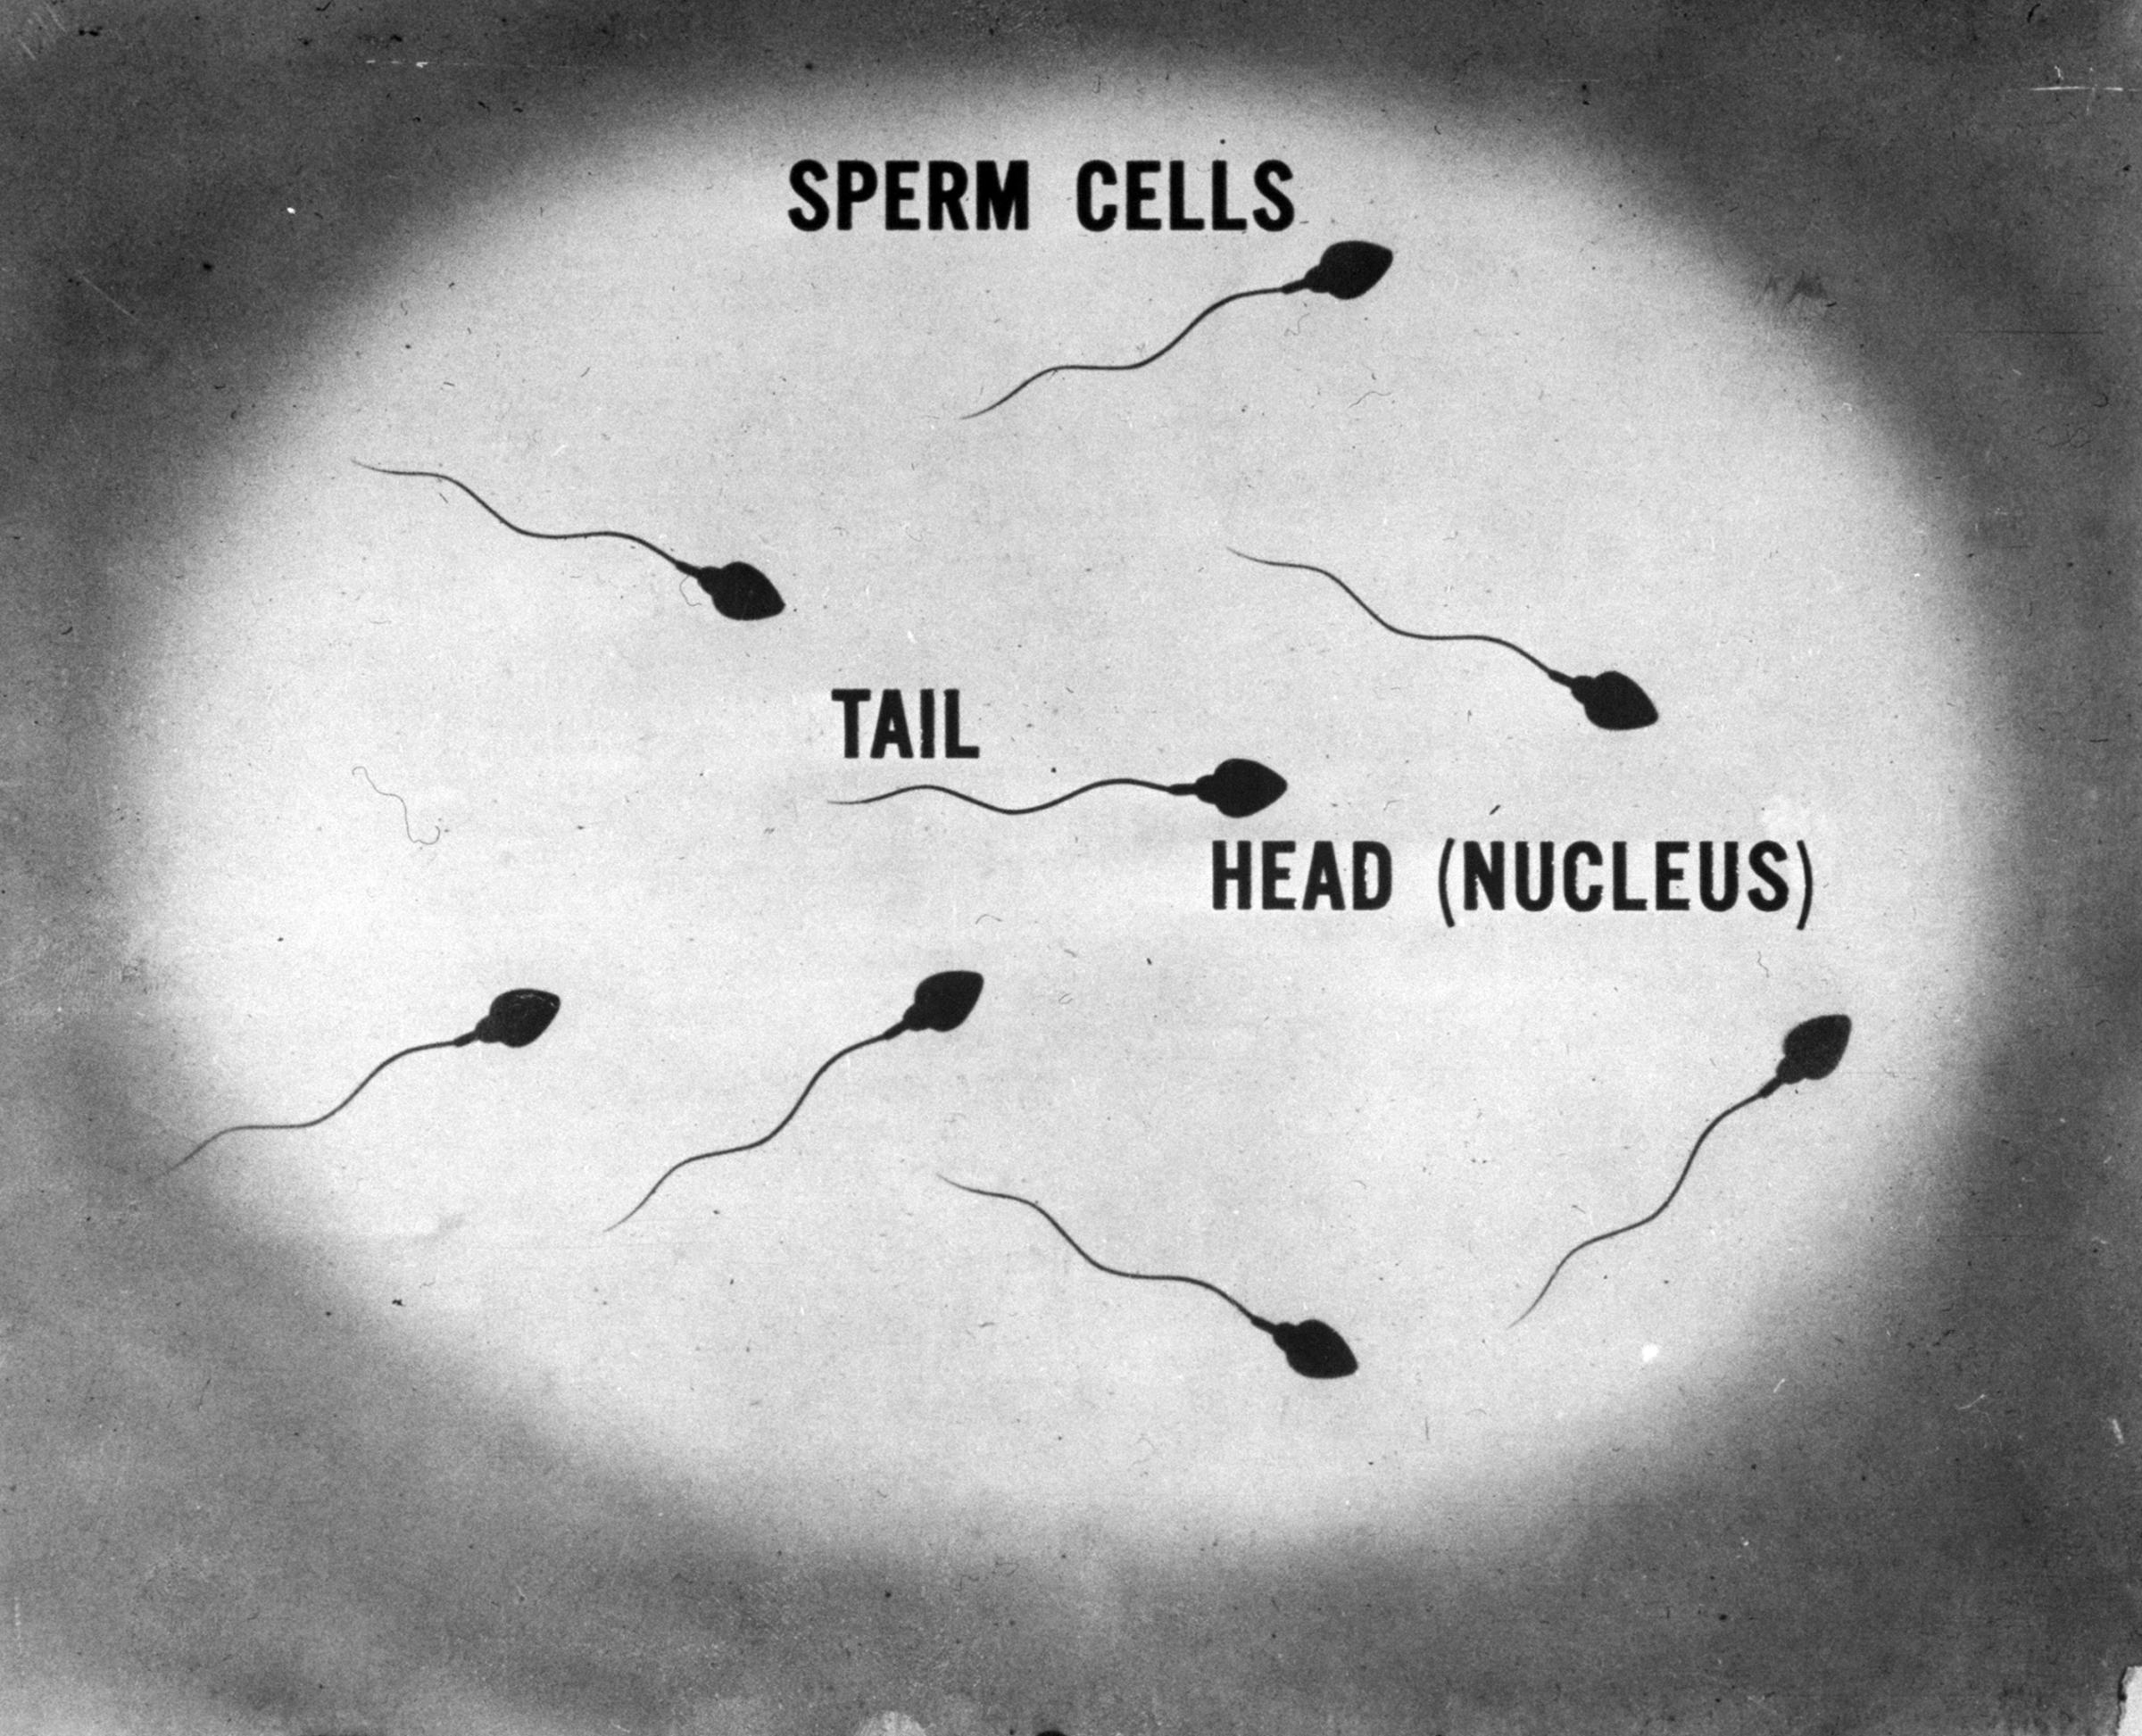 The movie shows male sperm cells, magnified. Head contains nucleus, tail wiggles and causes cell to move.